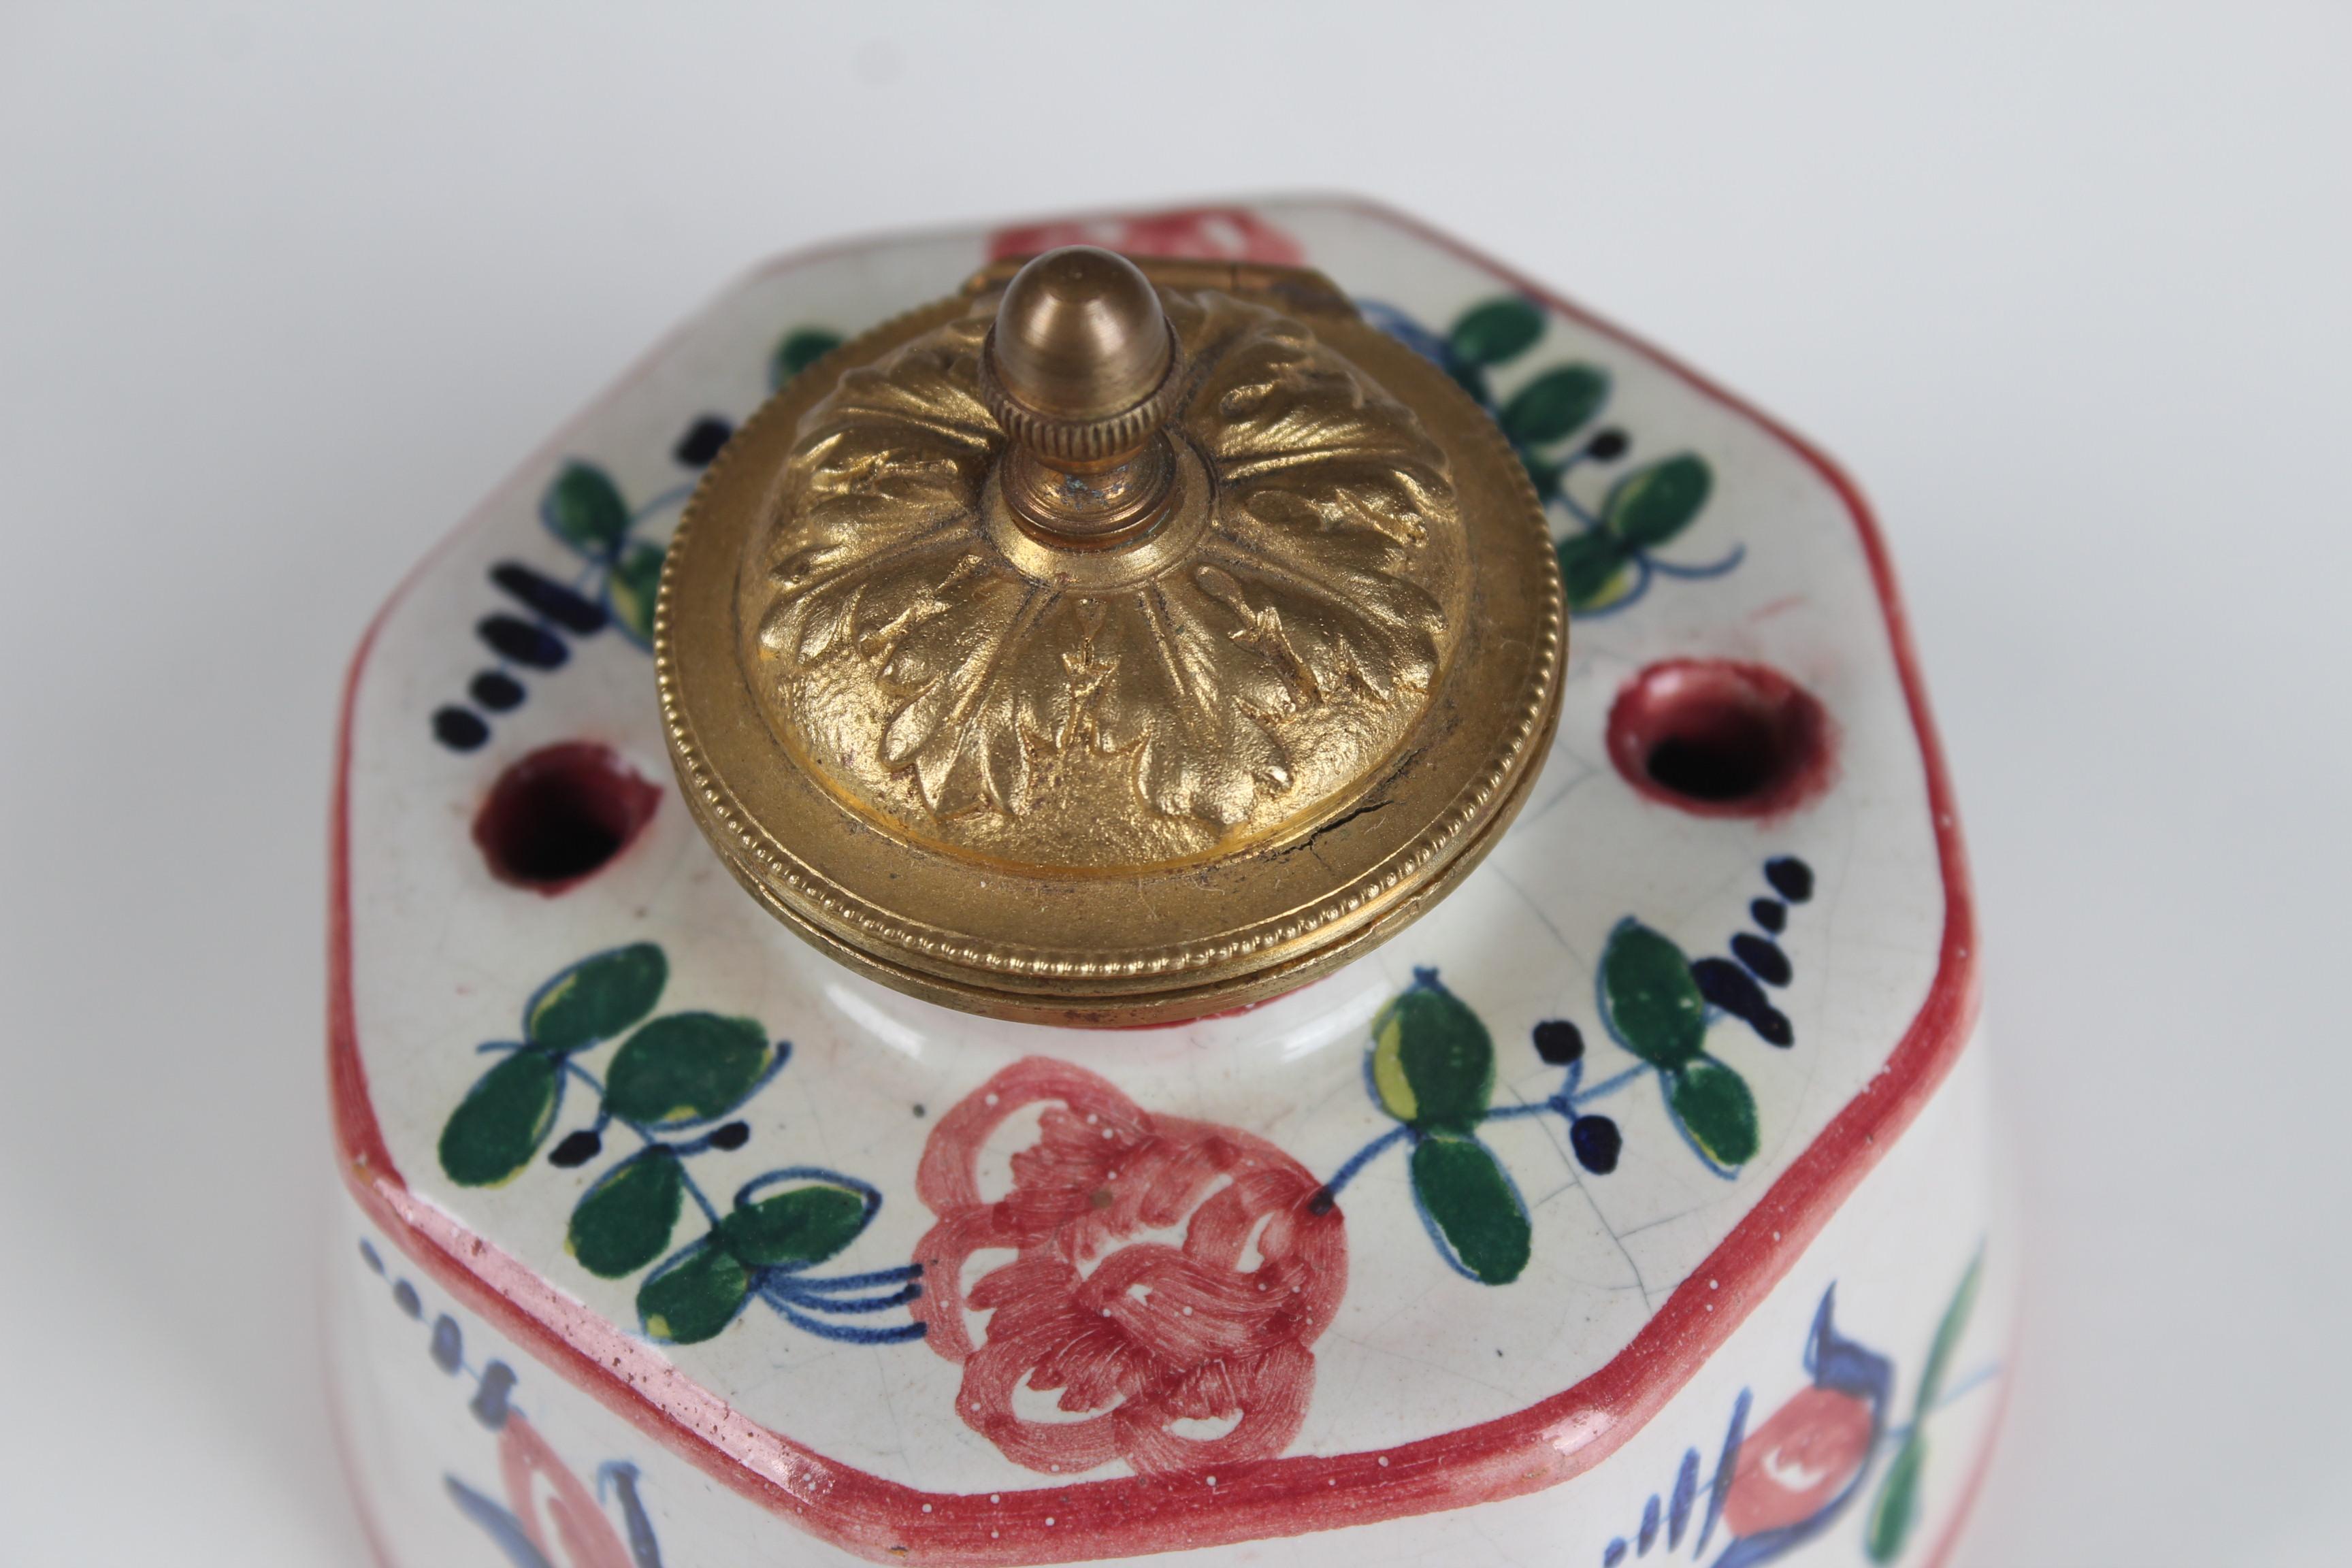 Late Victorian Antique Porcelain Inkwell, Handpainted, France, 1880s